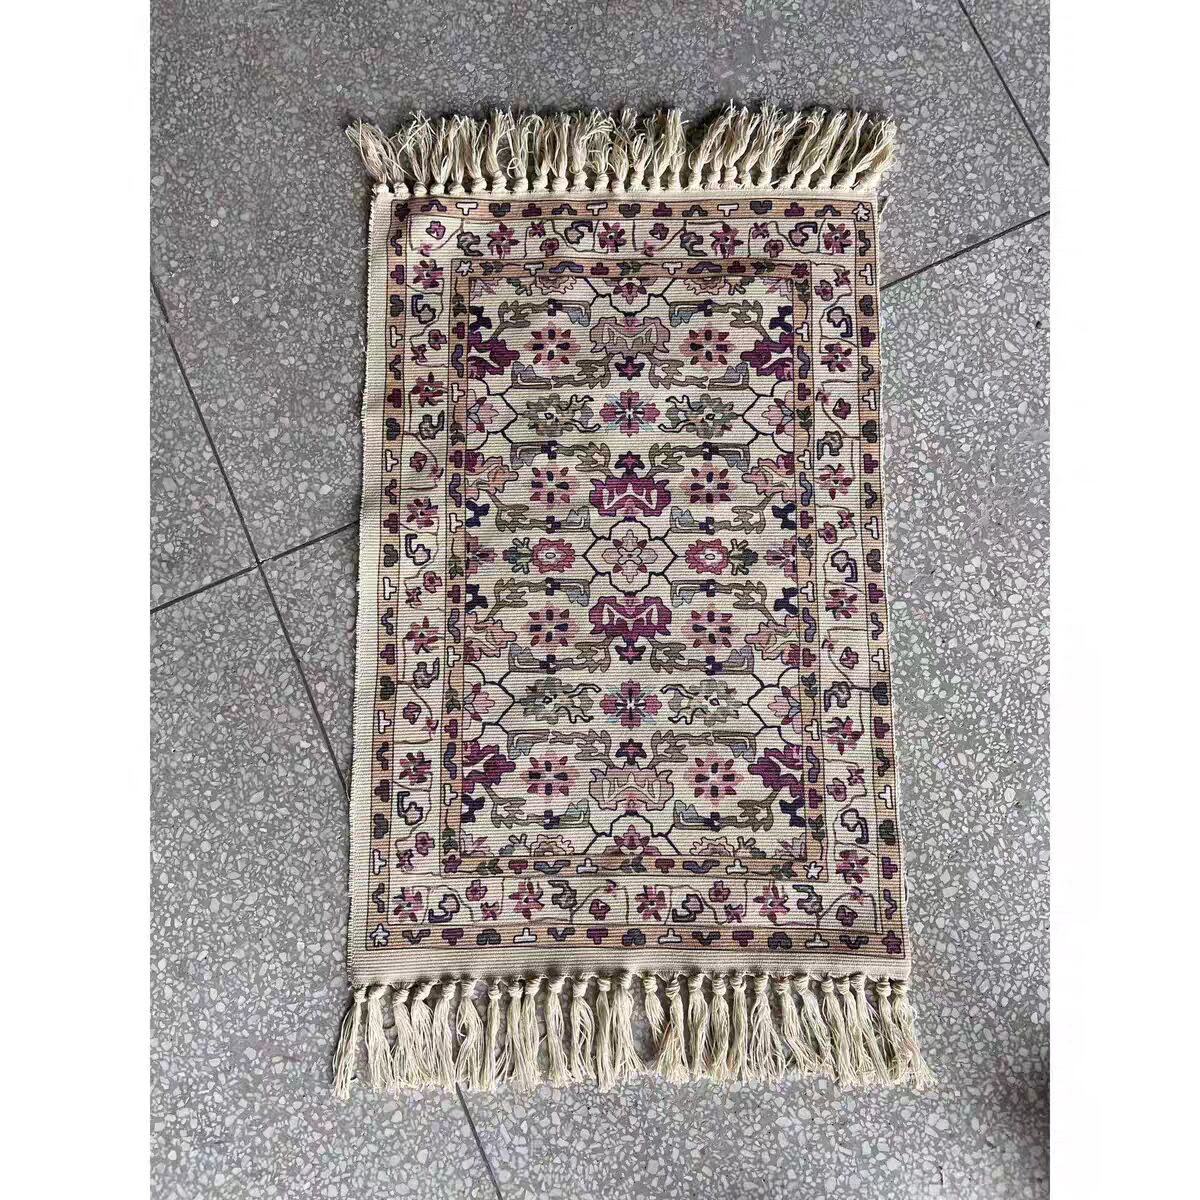 Vitality Ethnic-style  Sweet Cotton and Linen Rugs